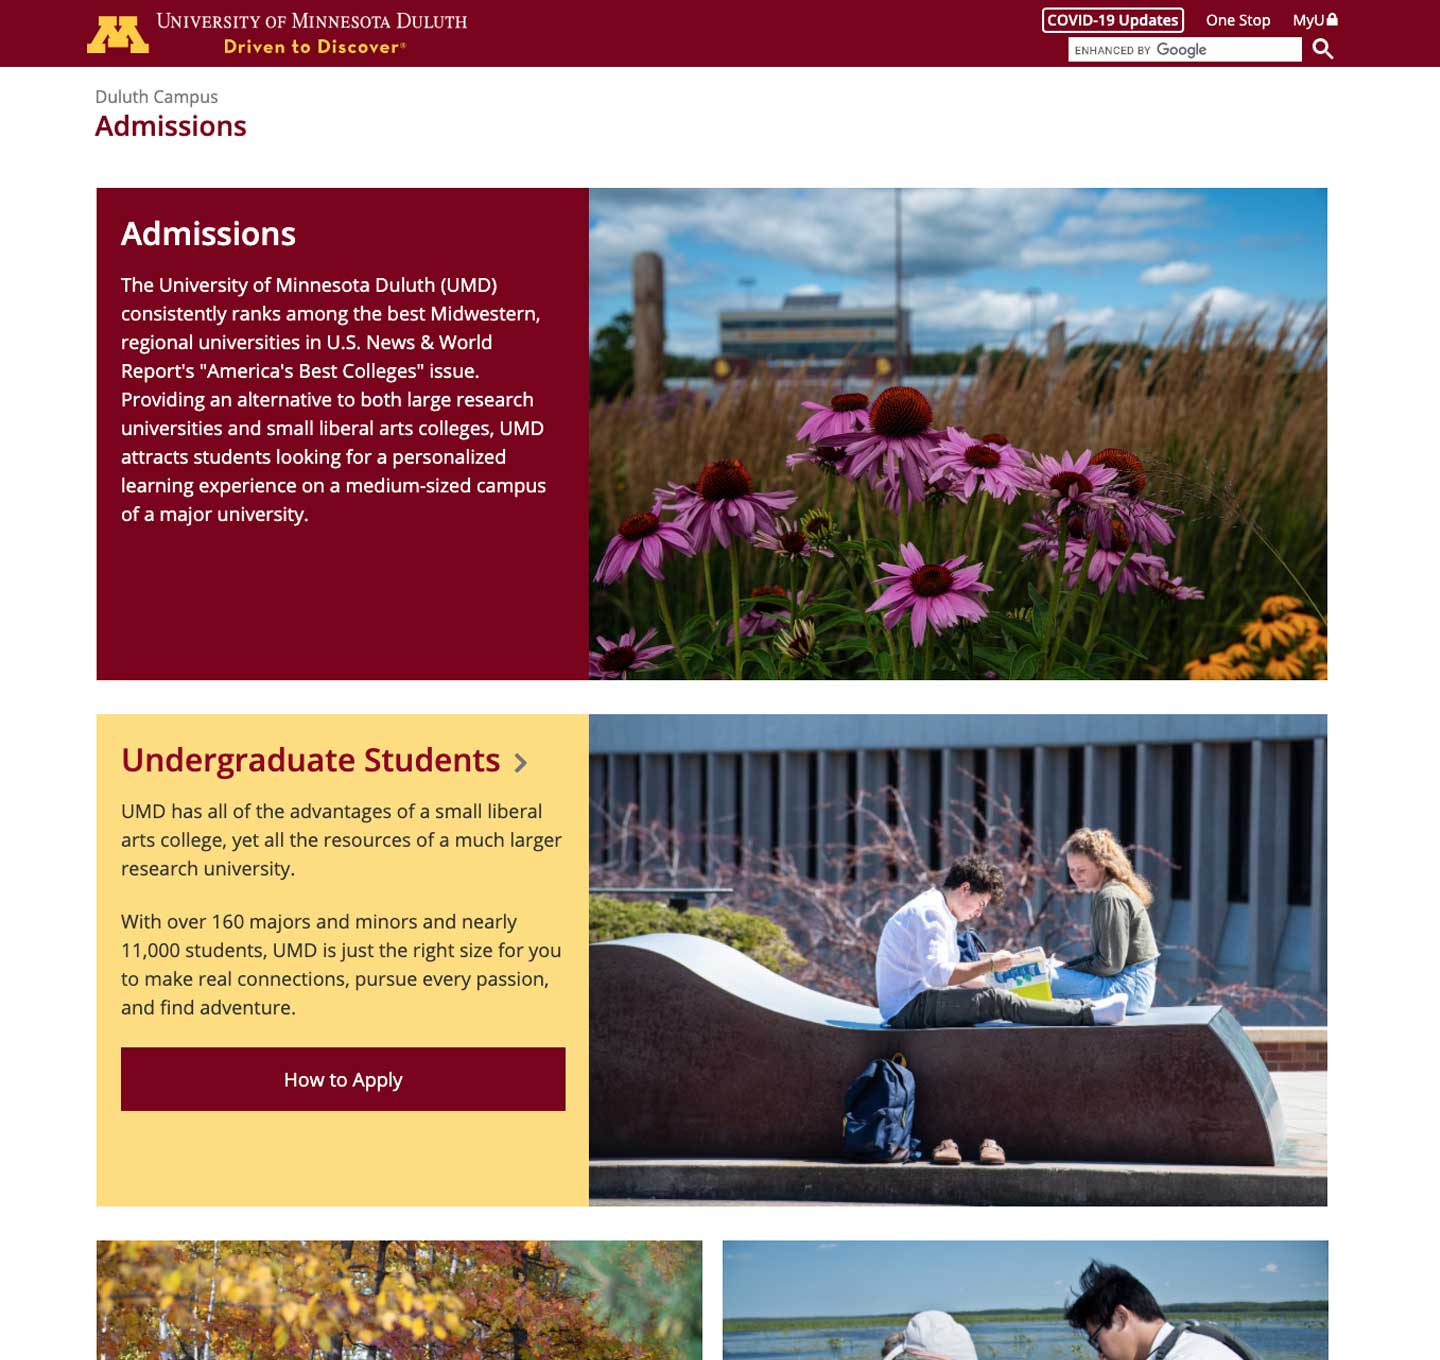 Duluth Campus Admissions home page